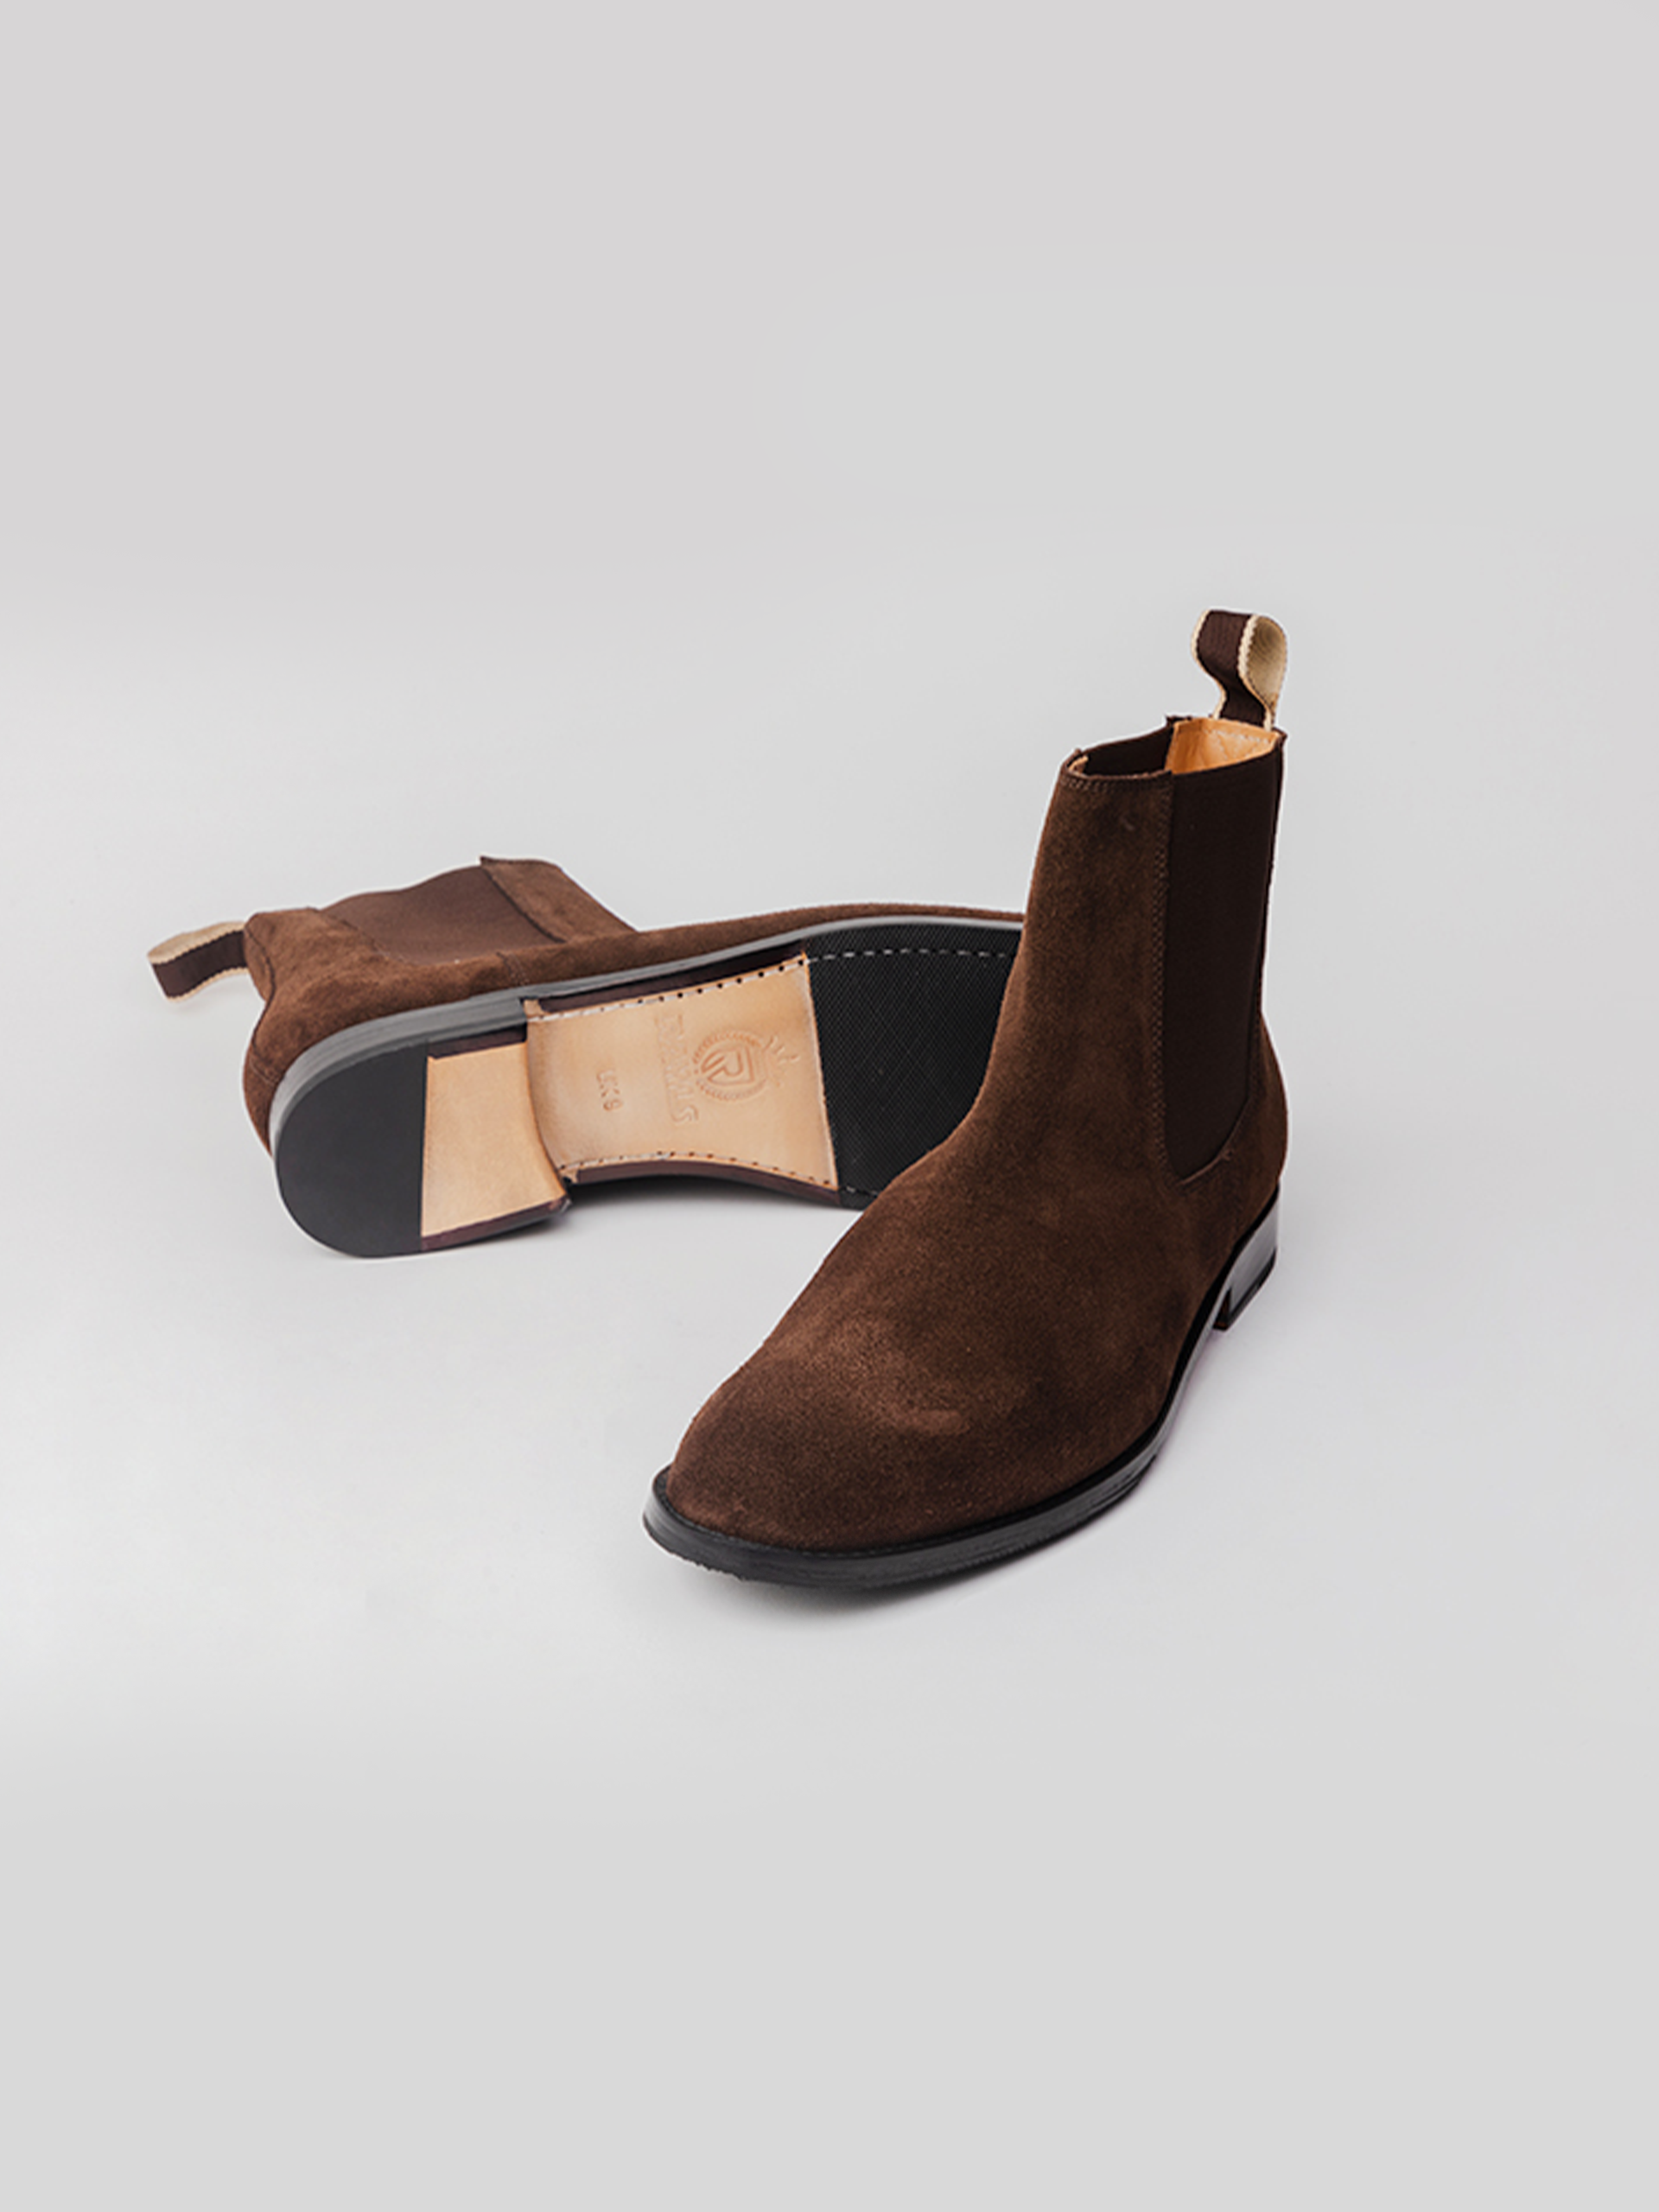 Daisy Mangle kedel Buy Leather Shoes For Sale | Chelsea Boots Men | Rawls Luxure